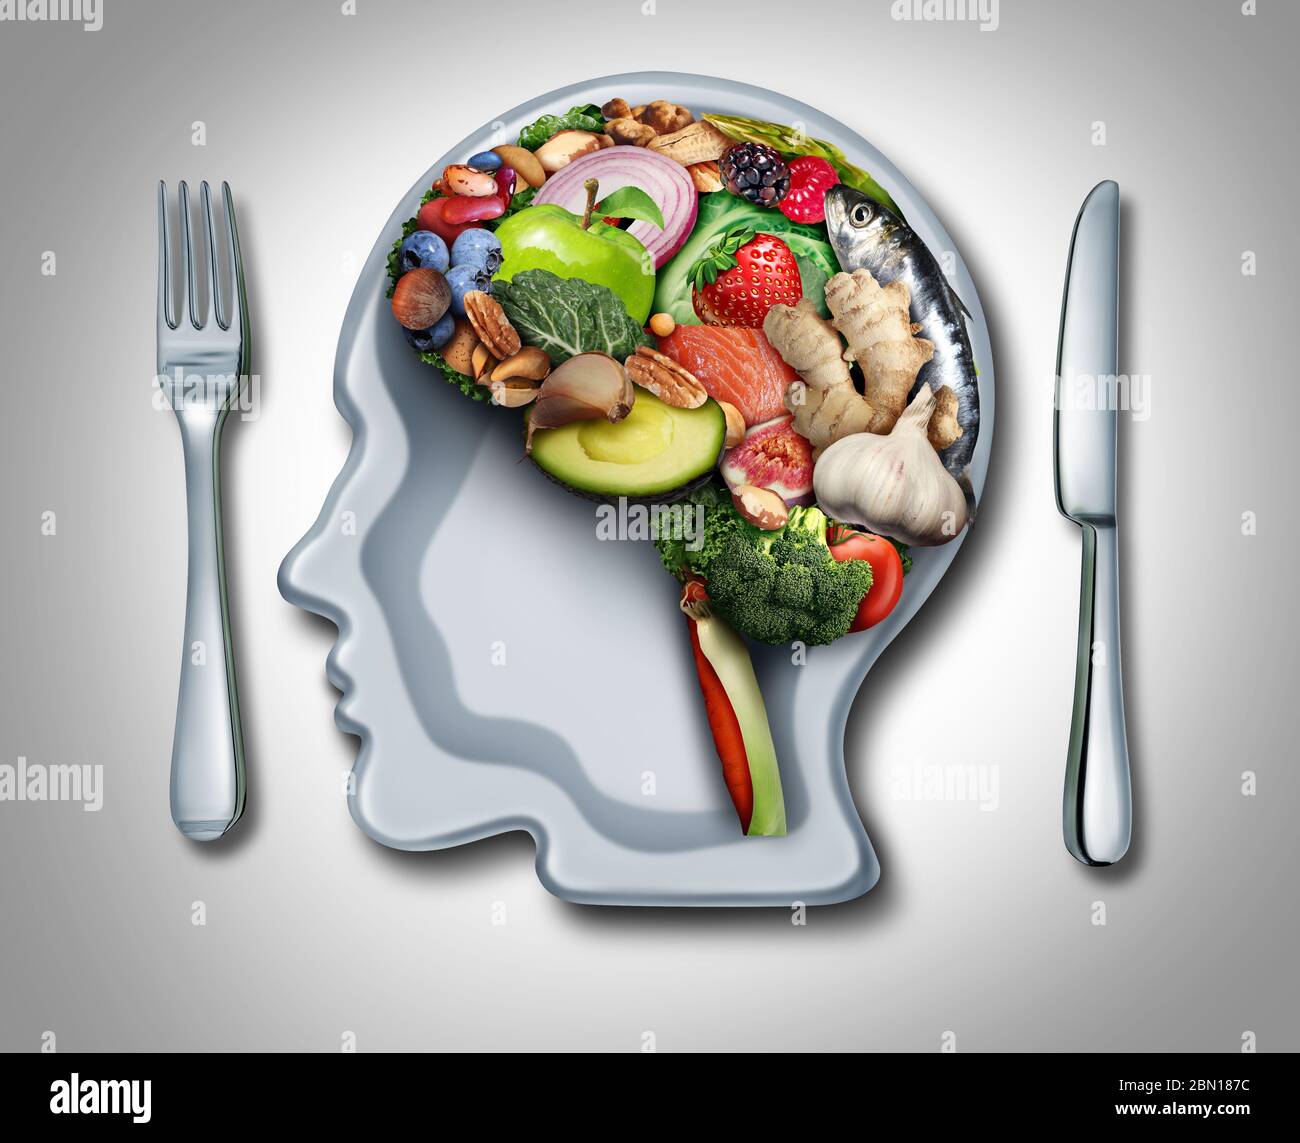 Brain diet and food psychology or nutritional psychiatry as healthy food shaped as a thinking organ with a plate in the shape of a human head. Stock Photo